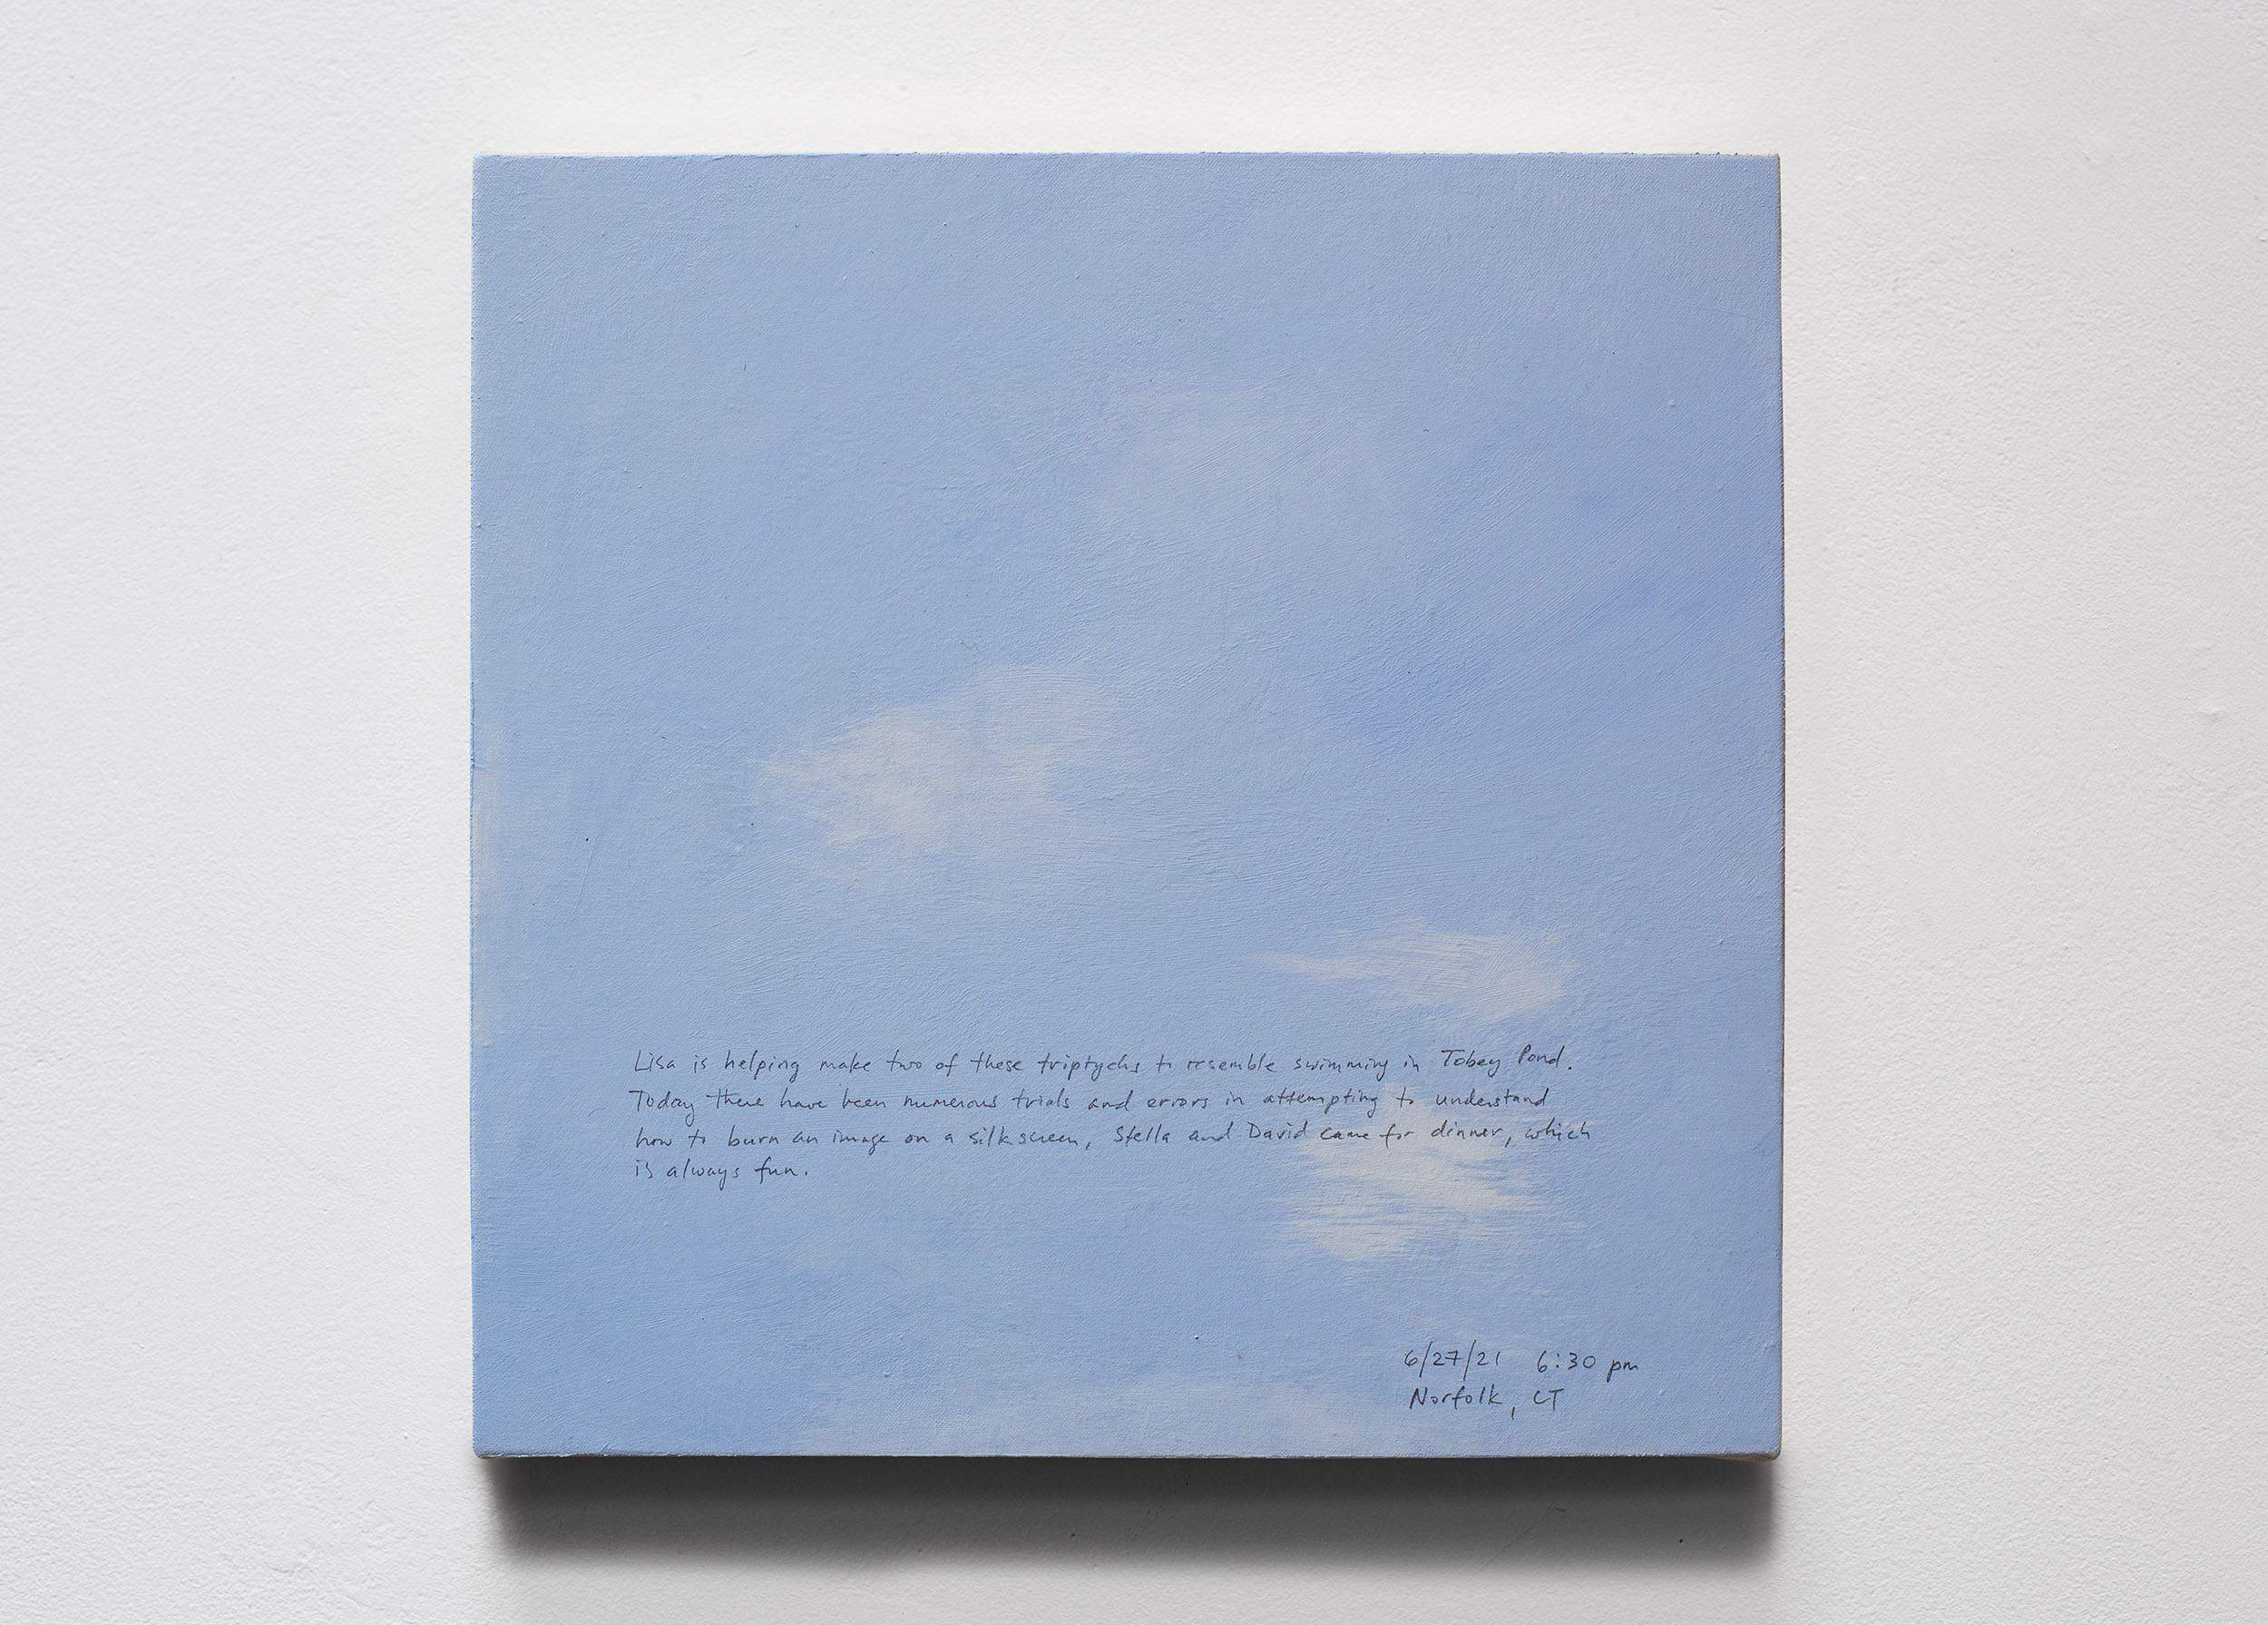 A 14 × 14 inch, acrylic painting of the sky. A journal entry is handwritten on the painting:

“Lisa is helping make two of these triptychs to resemble swimming in Tobey Pond. Today there have been numerous trials and errors in attempting to understand how to burn an image on a silkscreen. Stella and David came for dinner, which is always fun.

6/27/21 6:30 pm
Norfolk, CT”